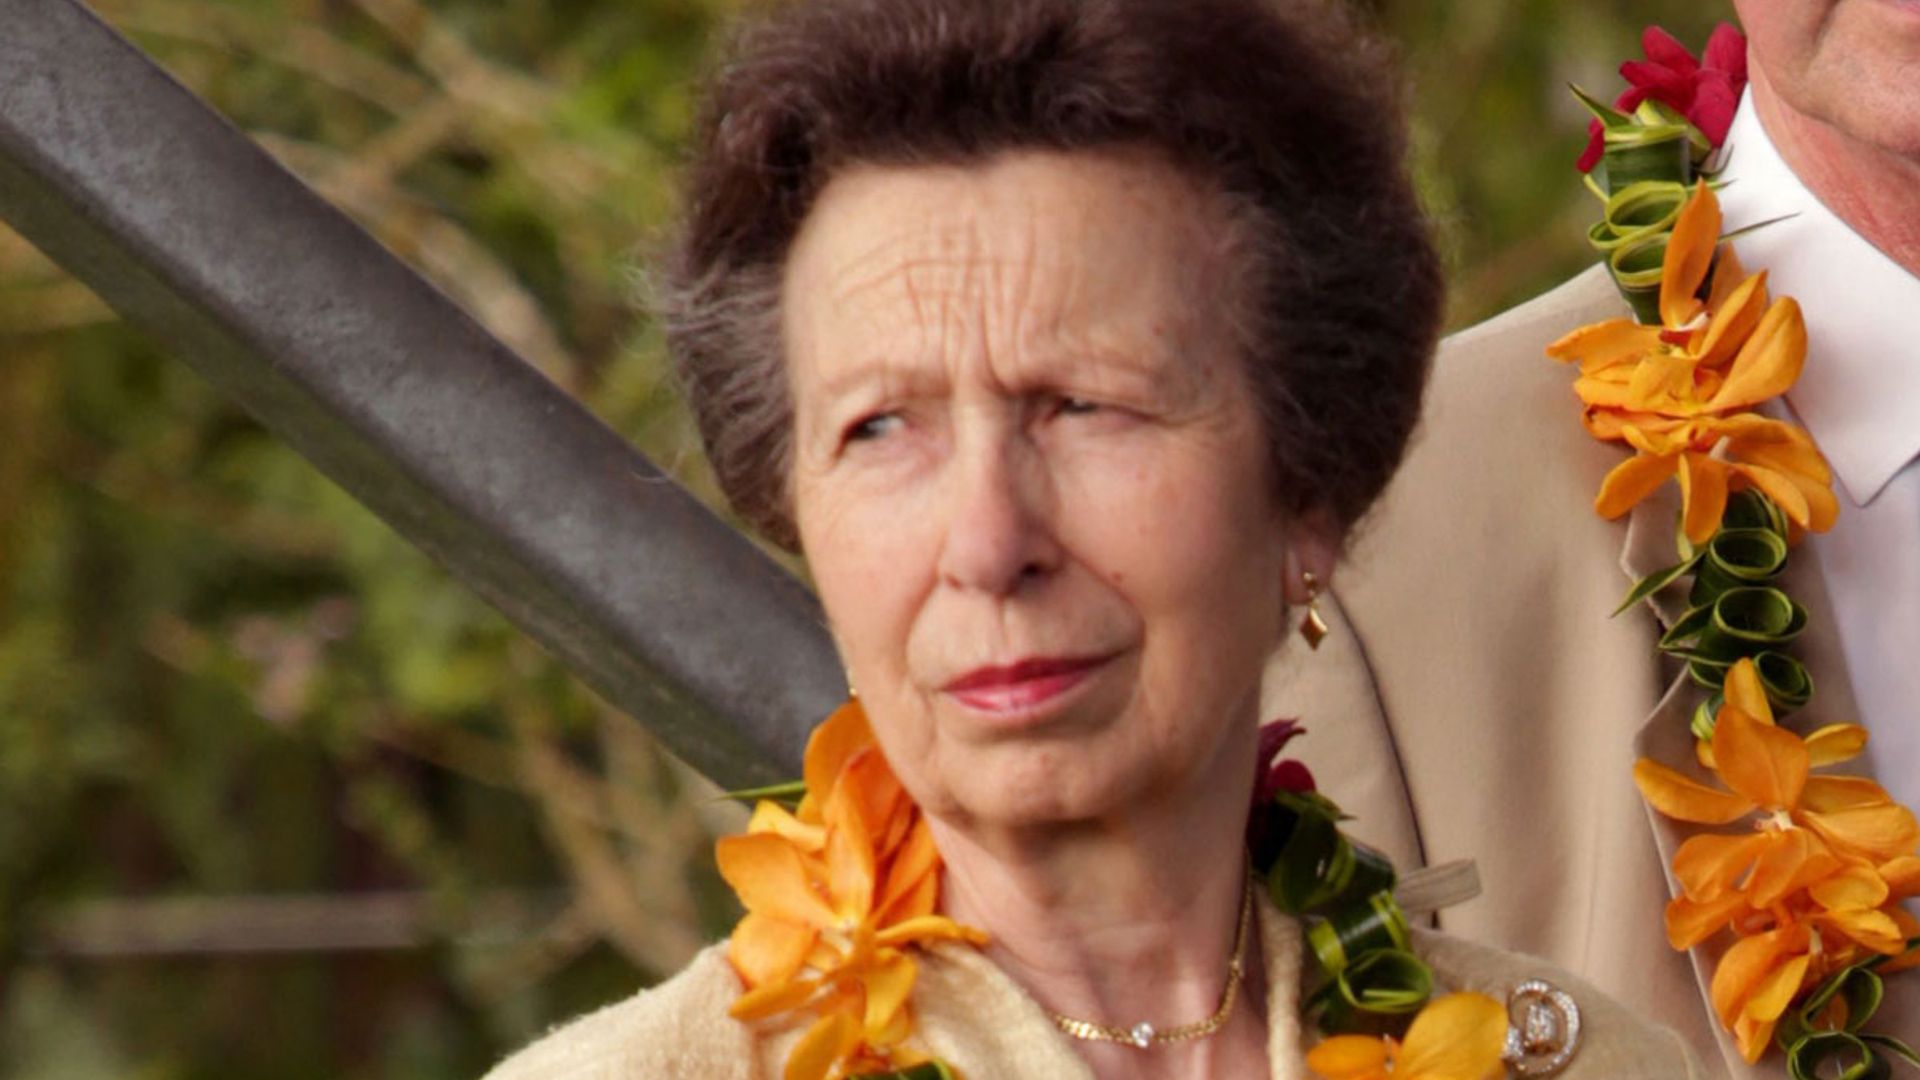 The helpful way Princess Anne is supporting the Queen during ill health